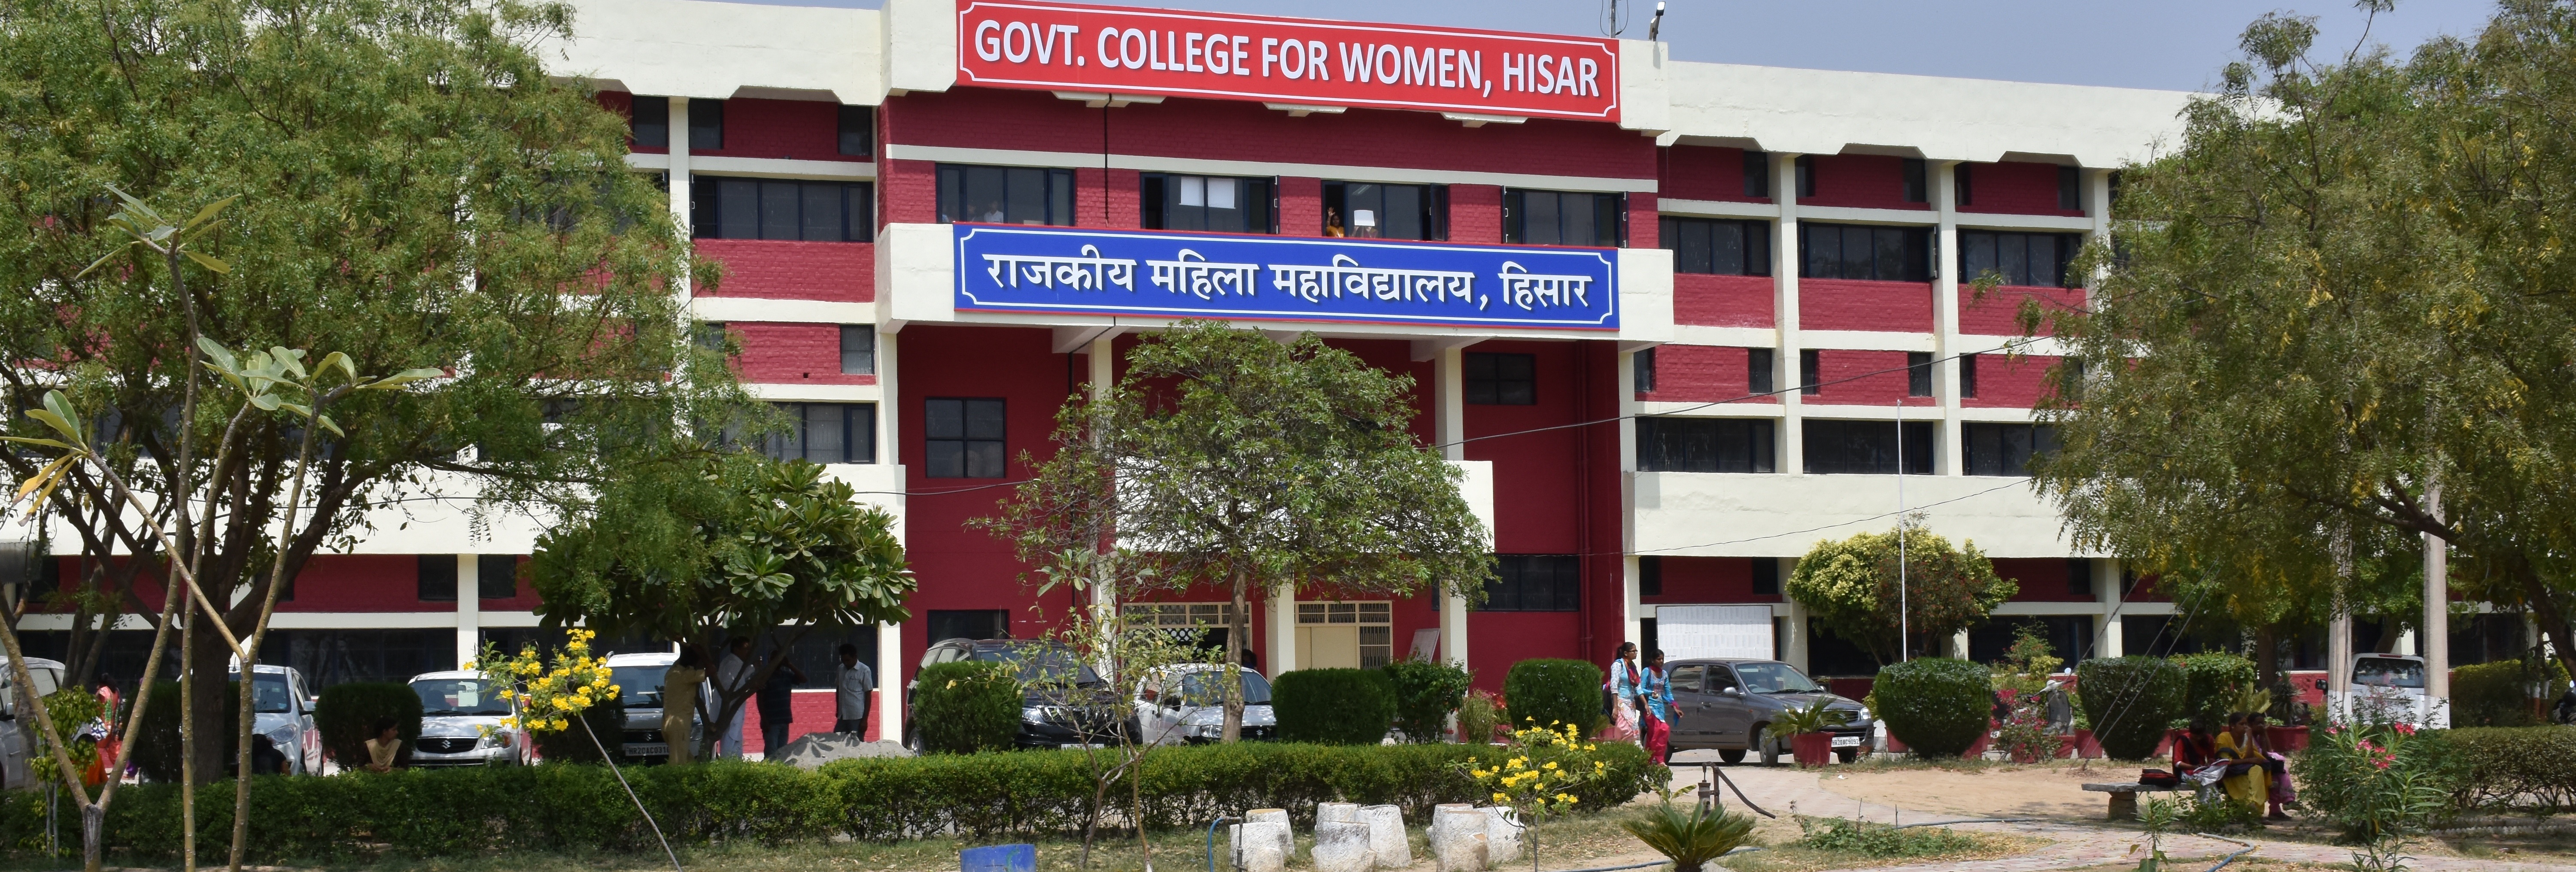 Government College for Women, Hisar Image